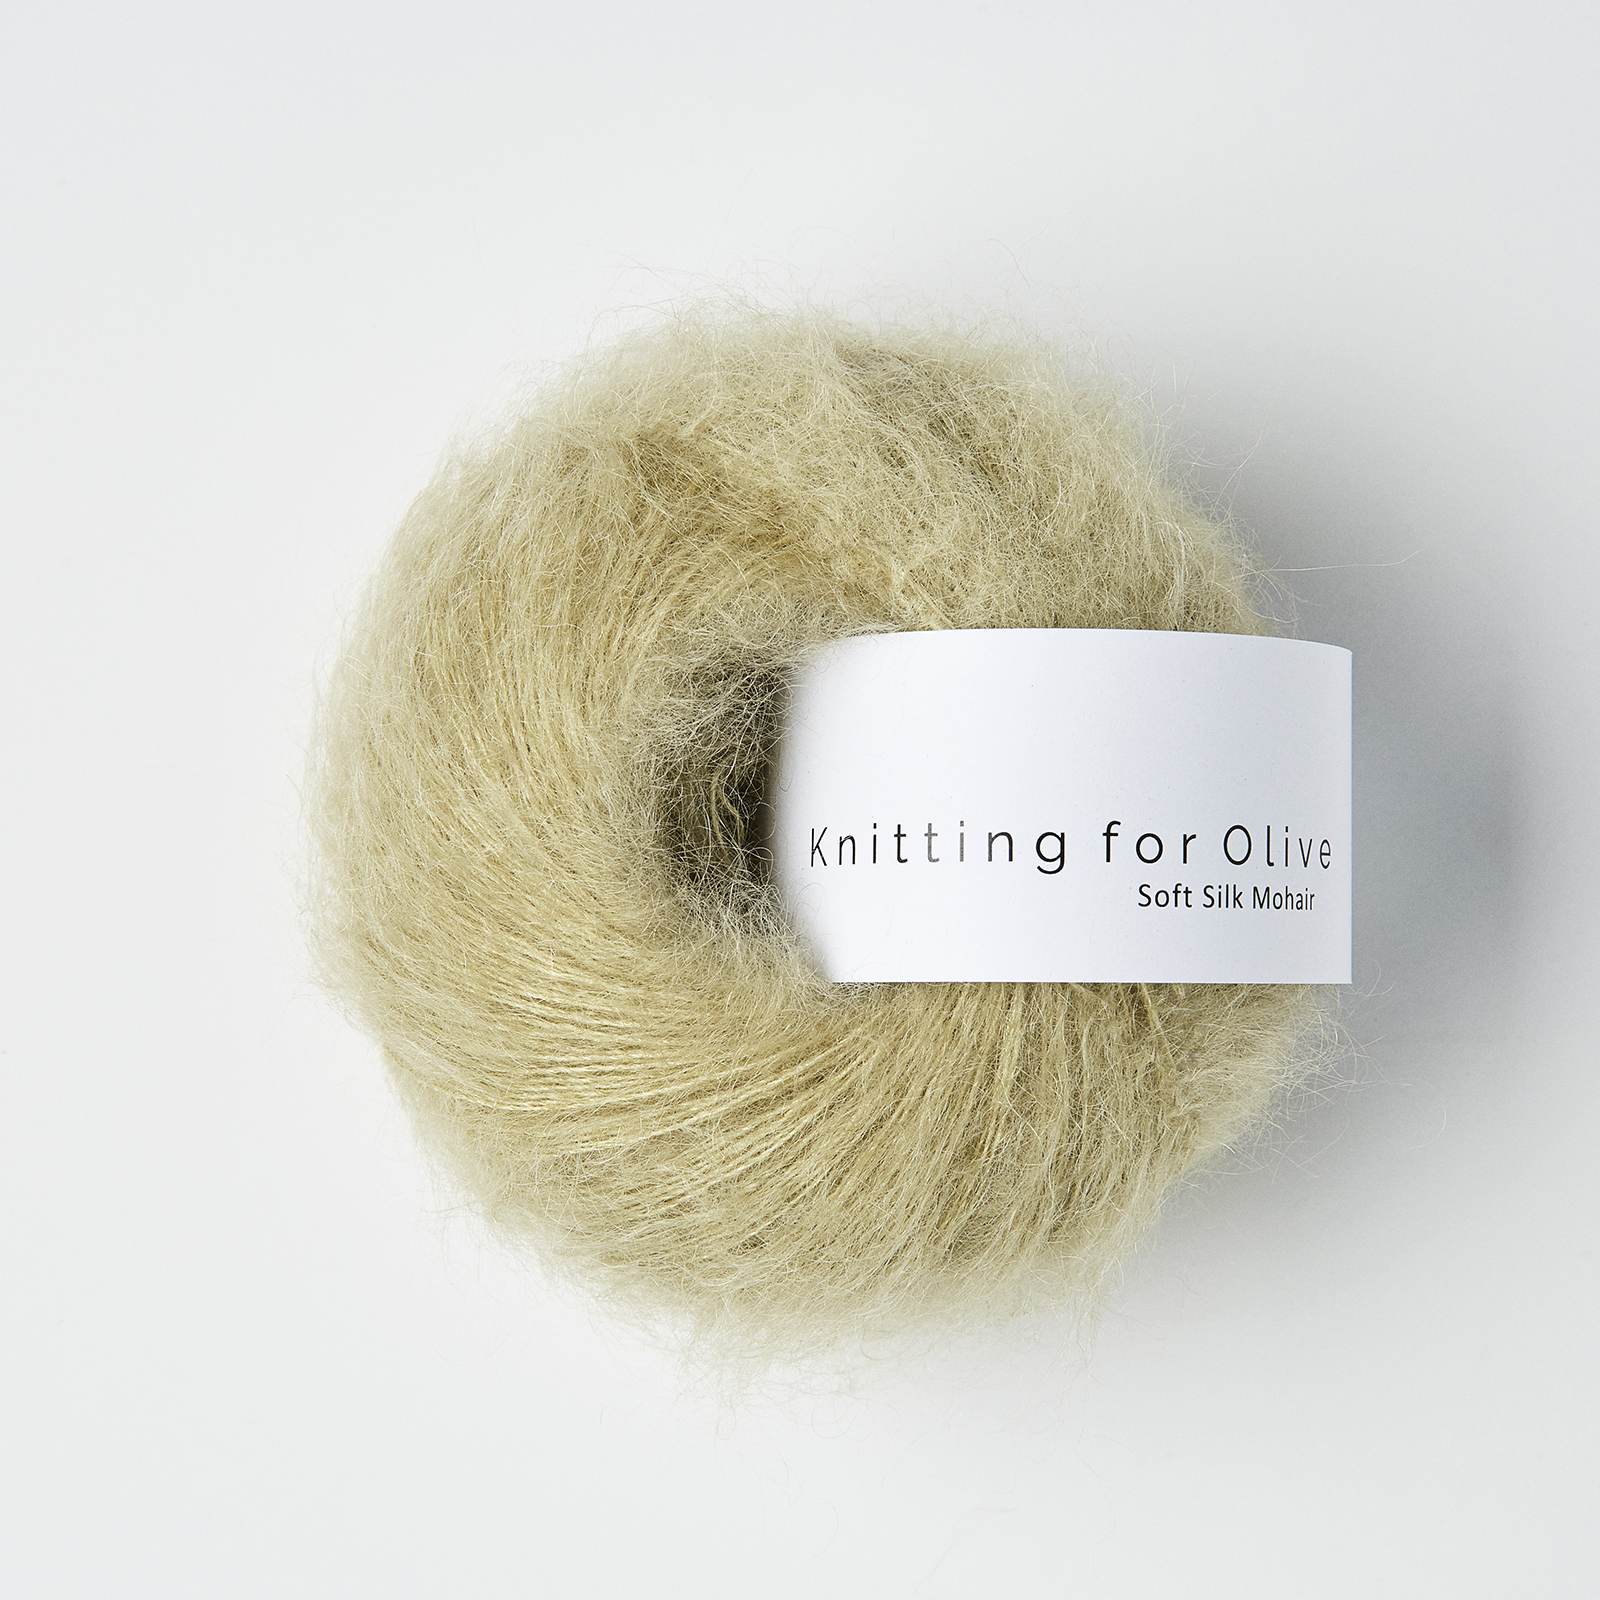 soft silk mohair knitting for olive | soft silk mohair: fennel seed